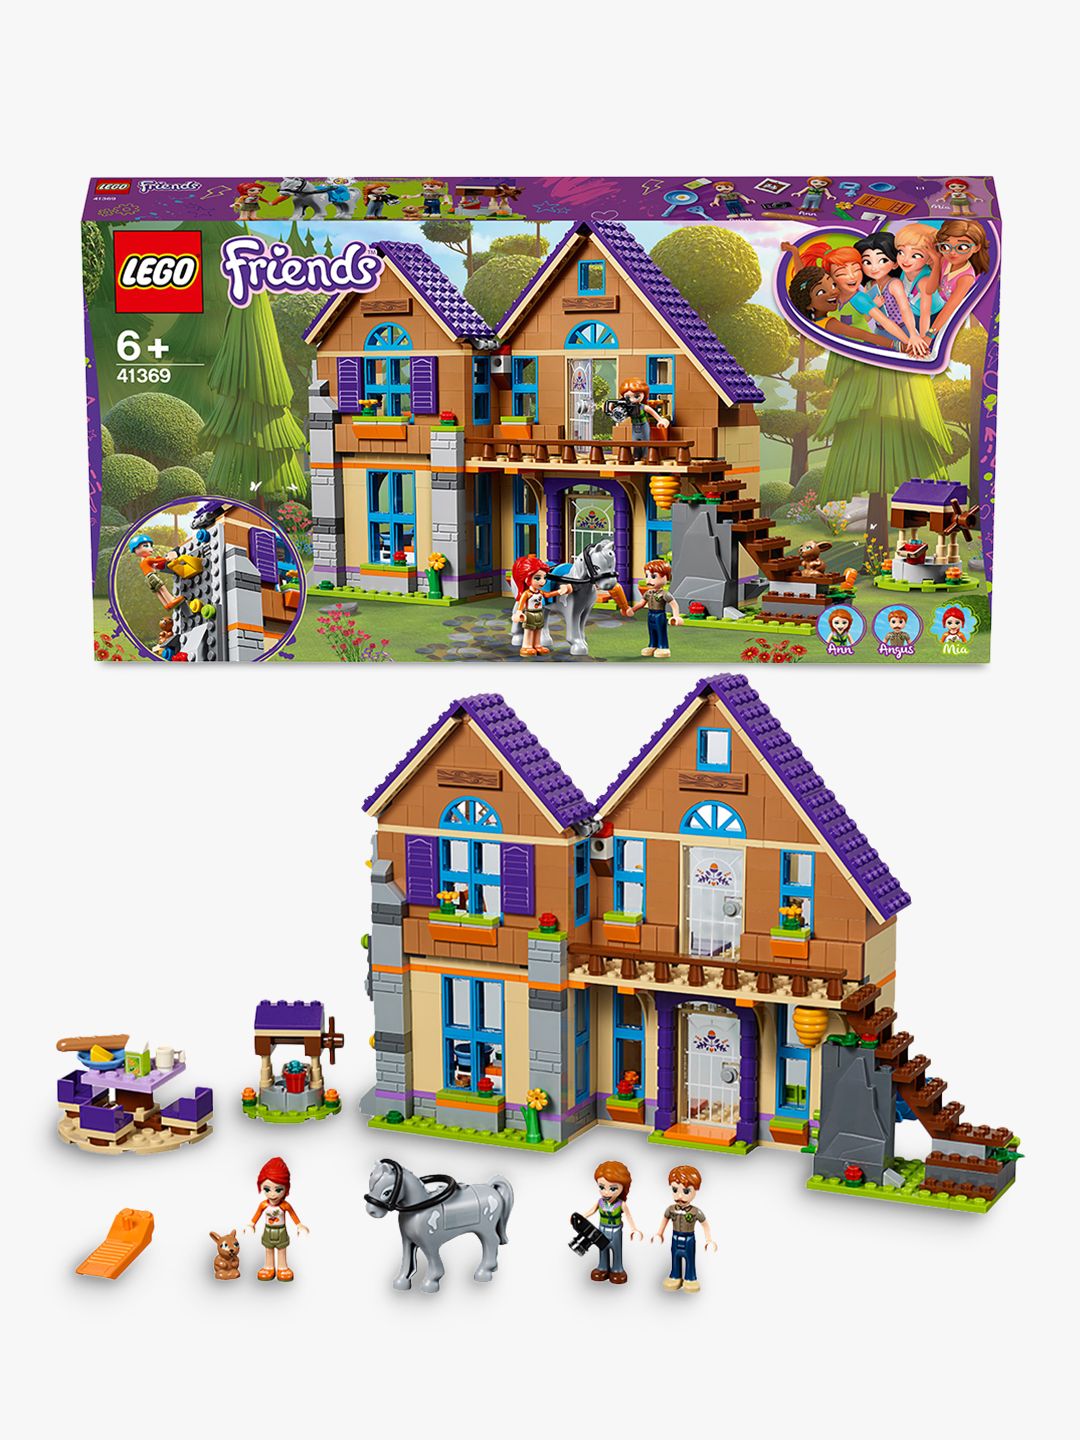 Lego Friends 41369 Mia S House At John Lewis And Partners